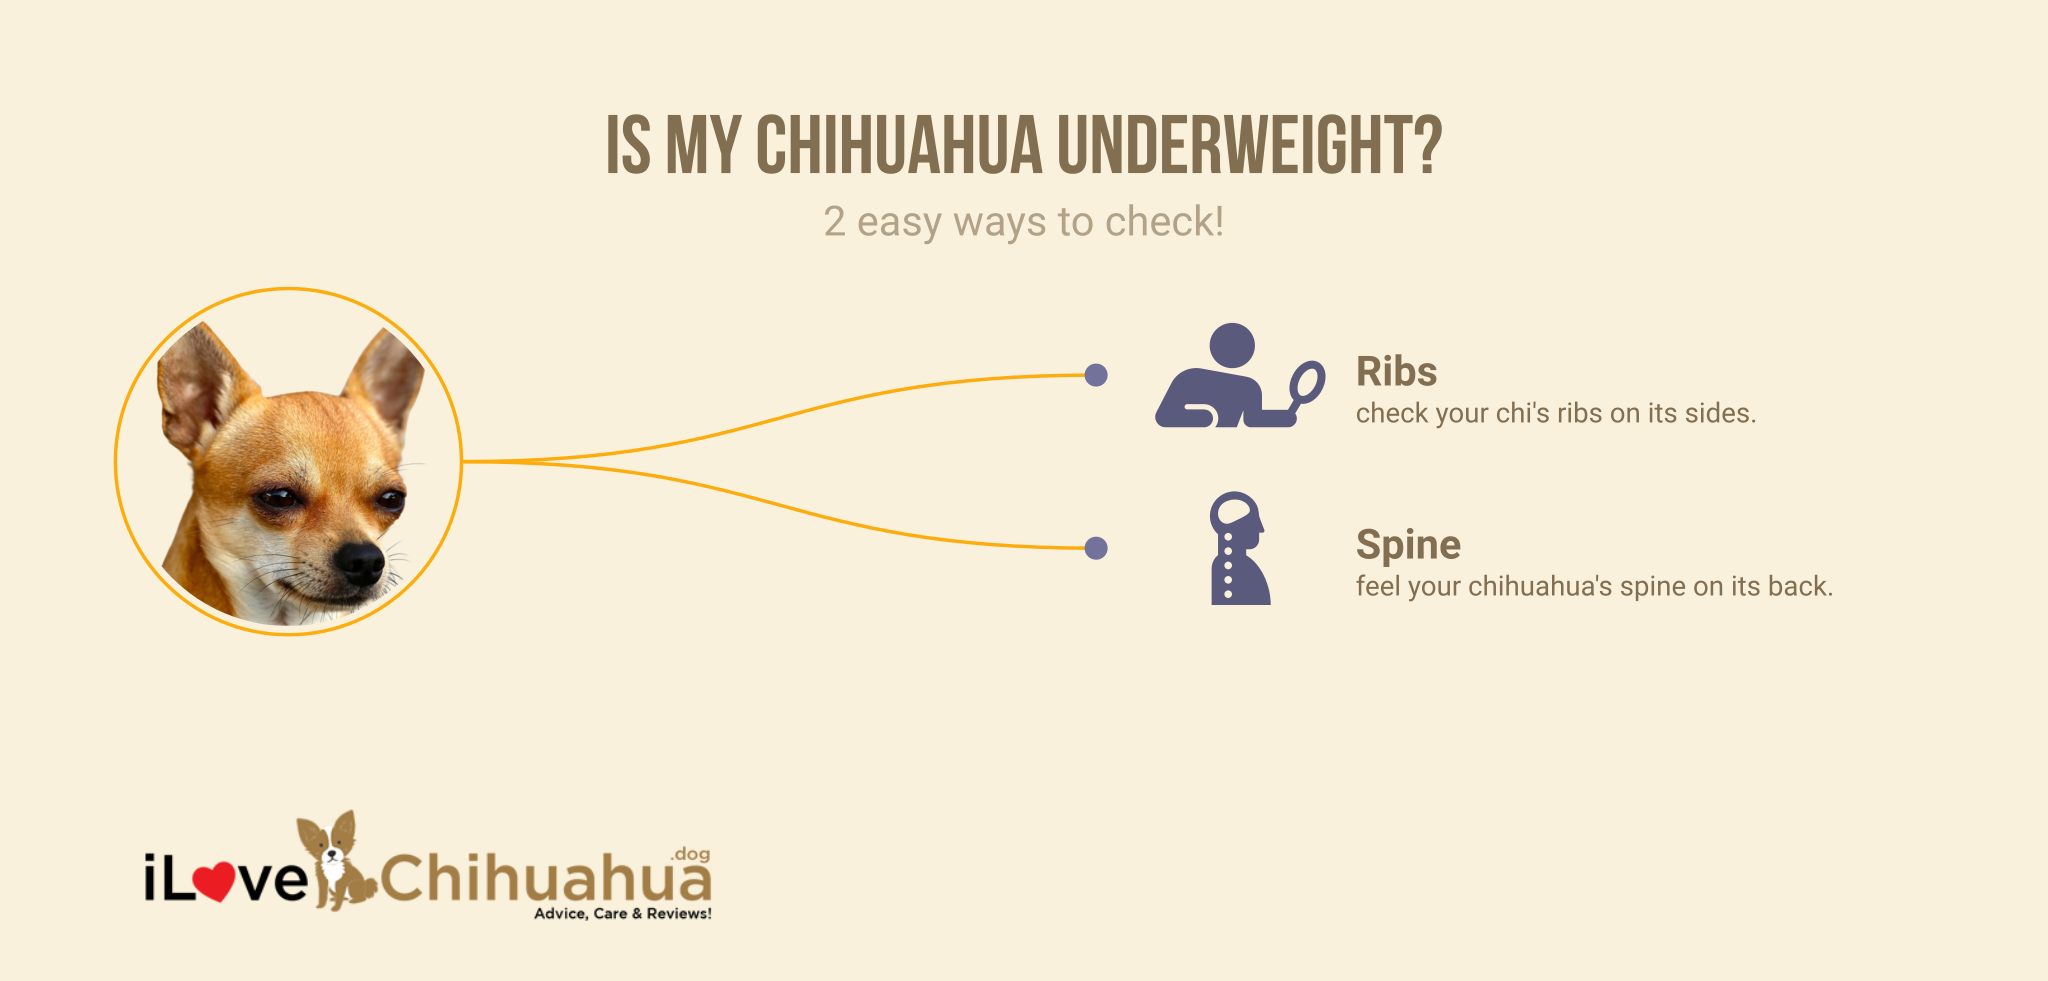 is my chihuahua underweight (infographic)